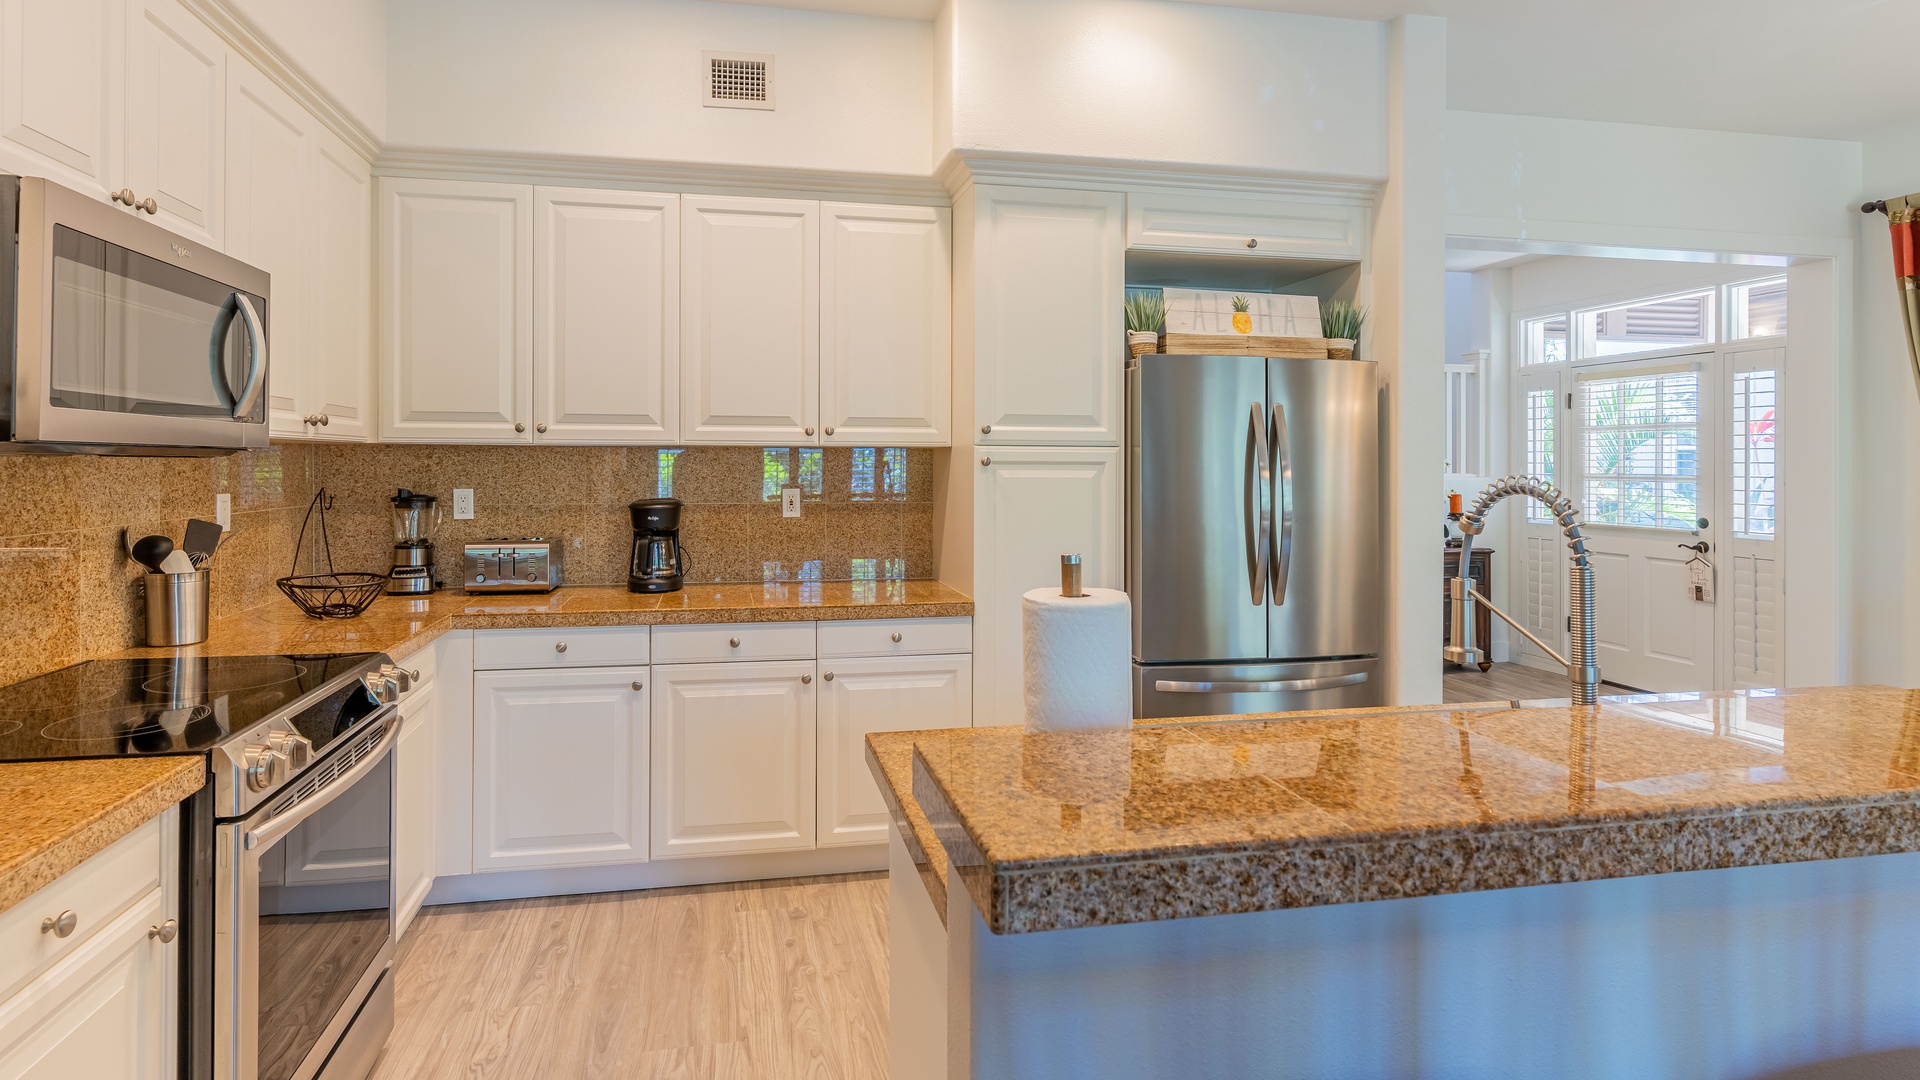 Kapolei Vacation Rentals, Coconut Plantation 1074-1 - Gracious amenities for your culinary adventures in the kitchen.